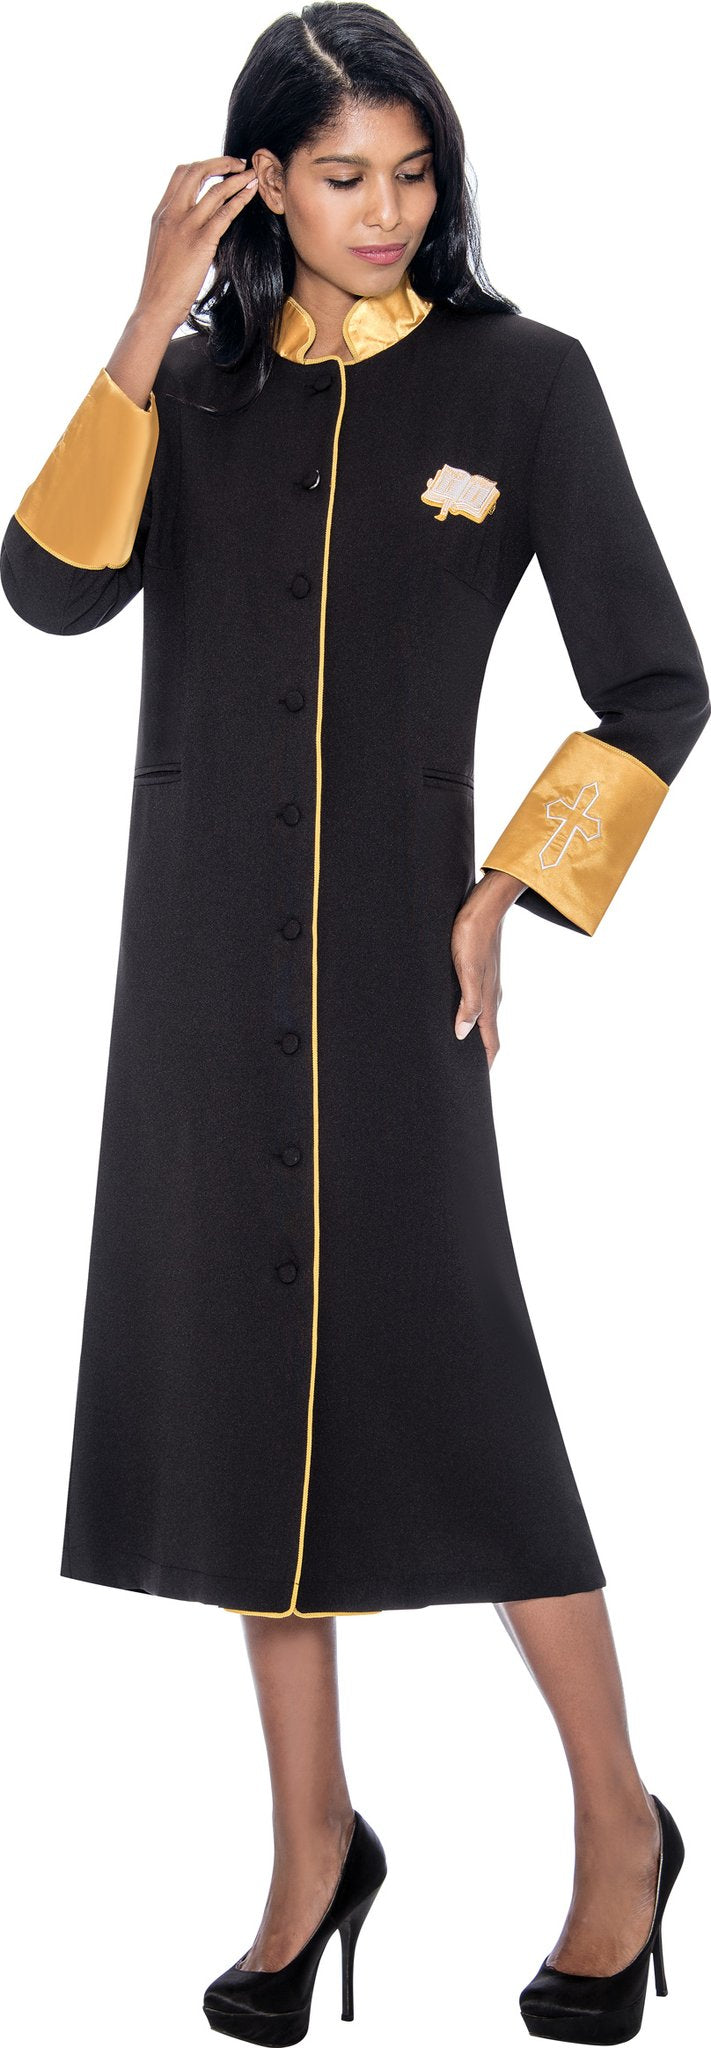 Women Cassock Robe RR9001-Black/Gold - Church Suits For Less